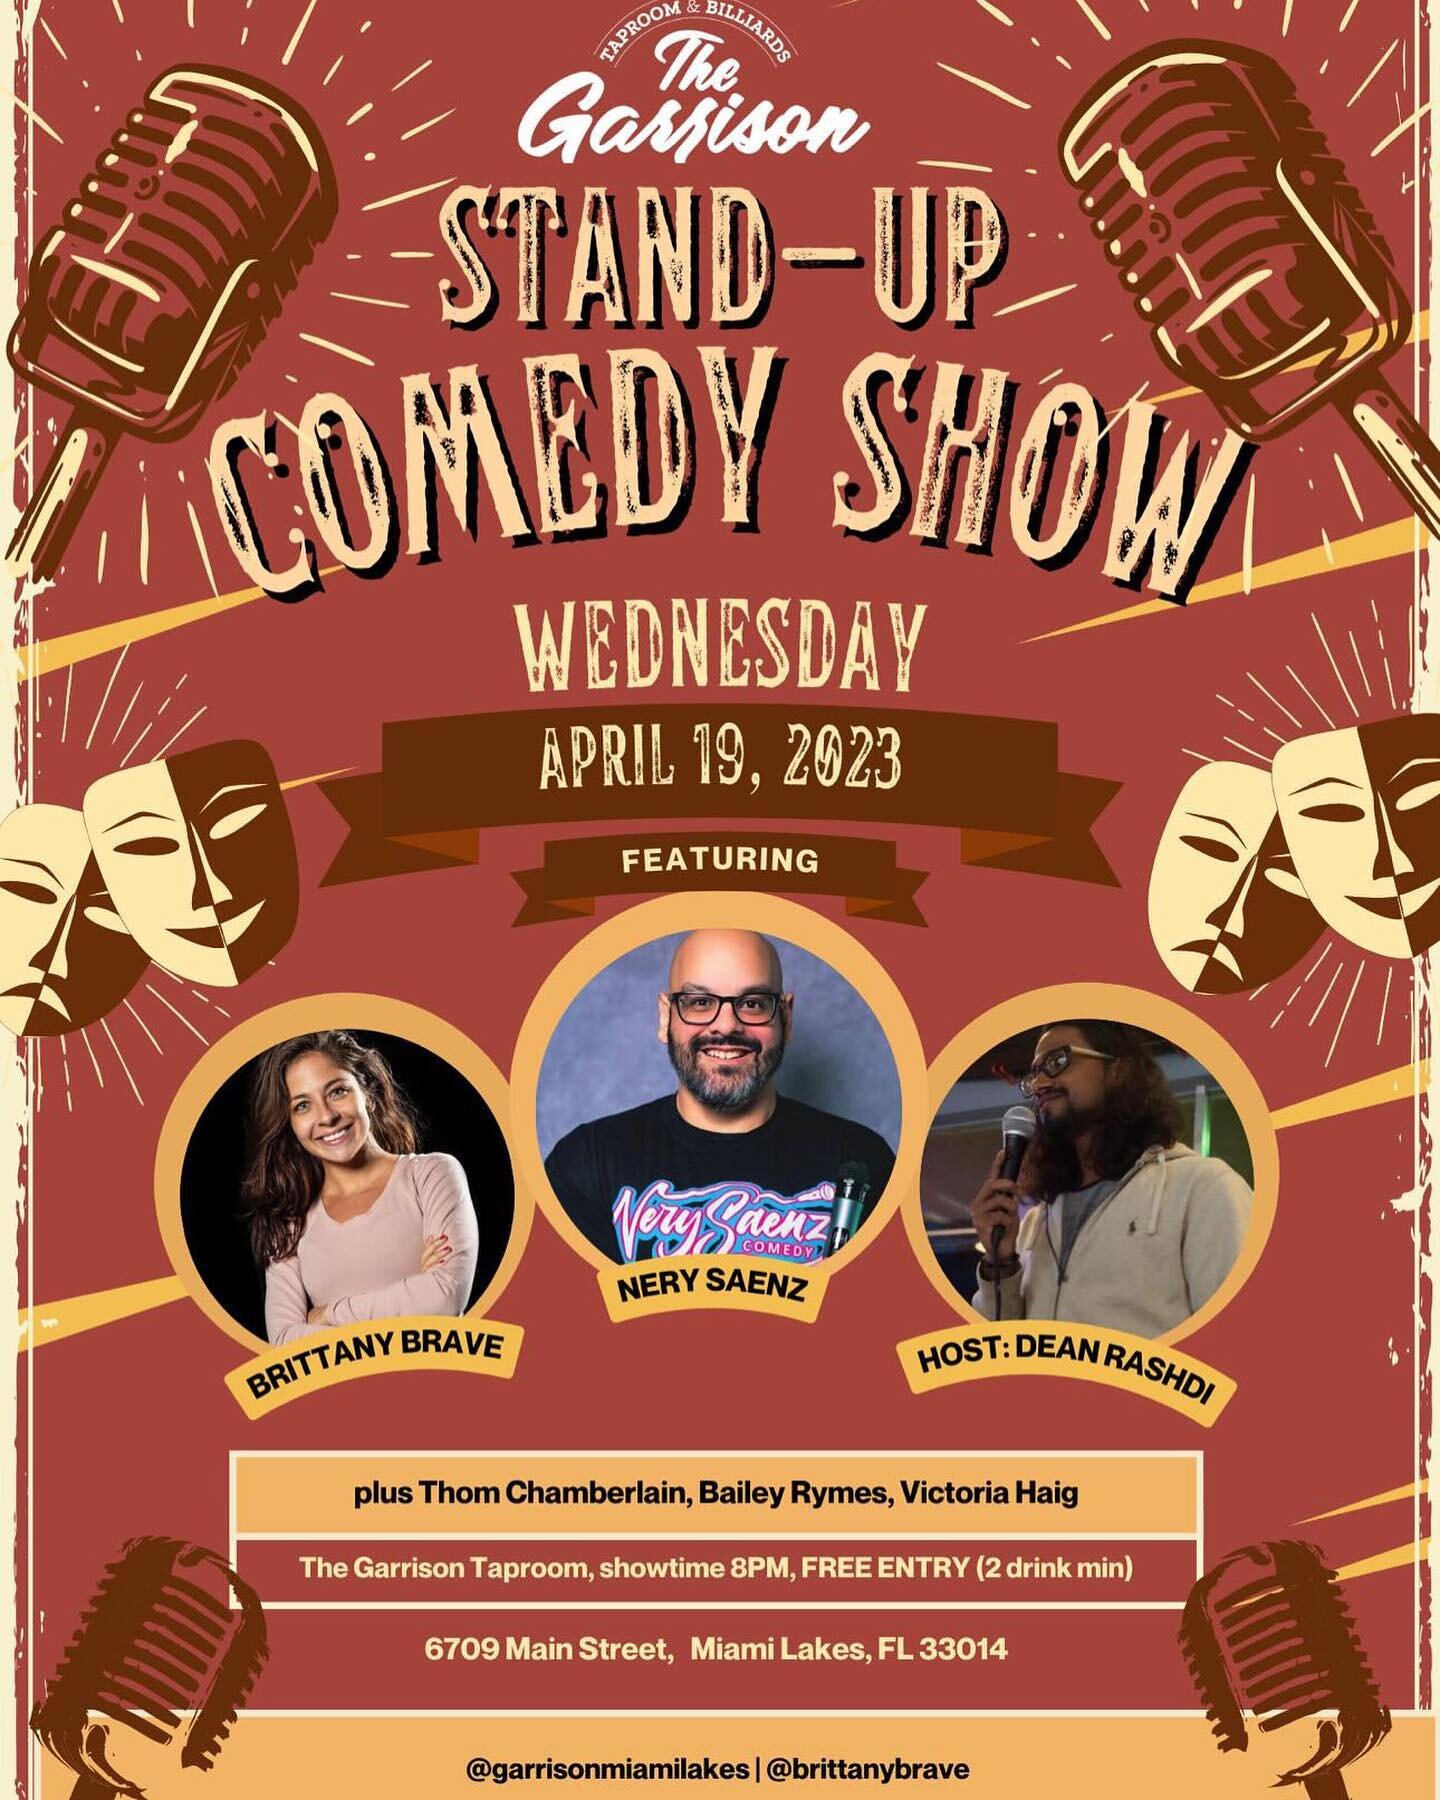 One week from today, I&rsquo;ll be doing a show with my home girl, @brittanybrave. Can&rsquo;t wait. LFG. 🙏🏽💪🏽 #TeamNery #Comedy #JustaKidFromSweetwater #Miami #MiamiLakes #comedyShow #comedy #show #ManChild #Nica #Nicaraguan #Funny #Nicaragua